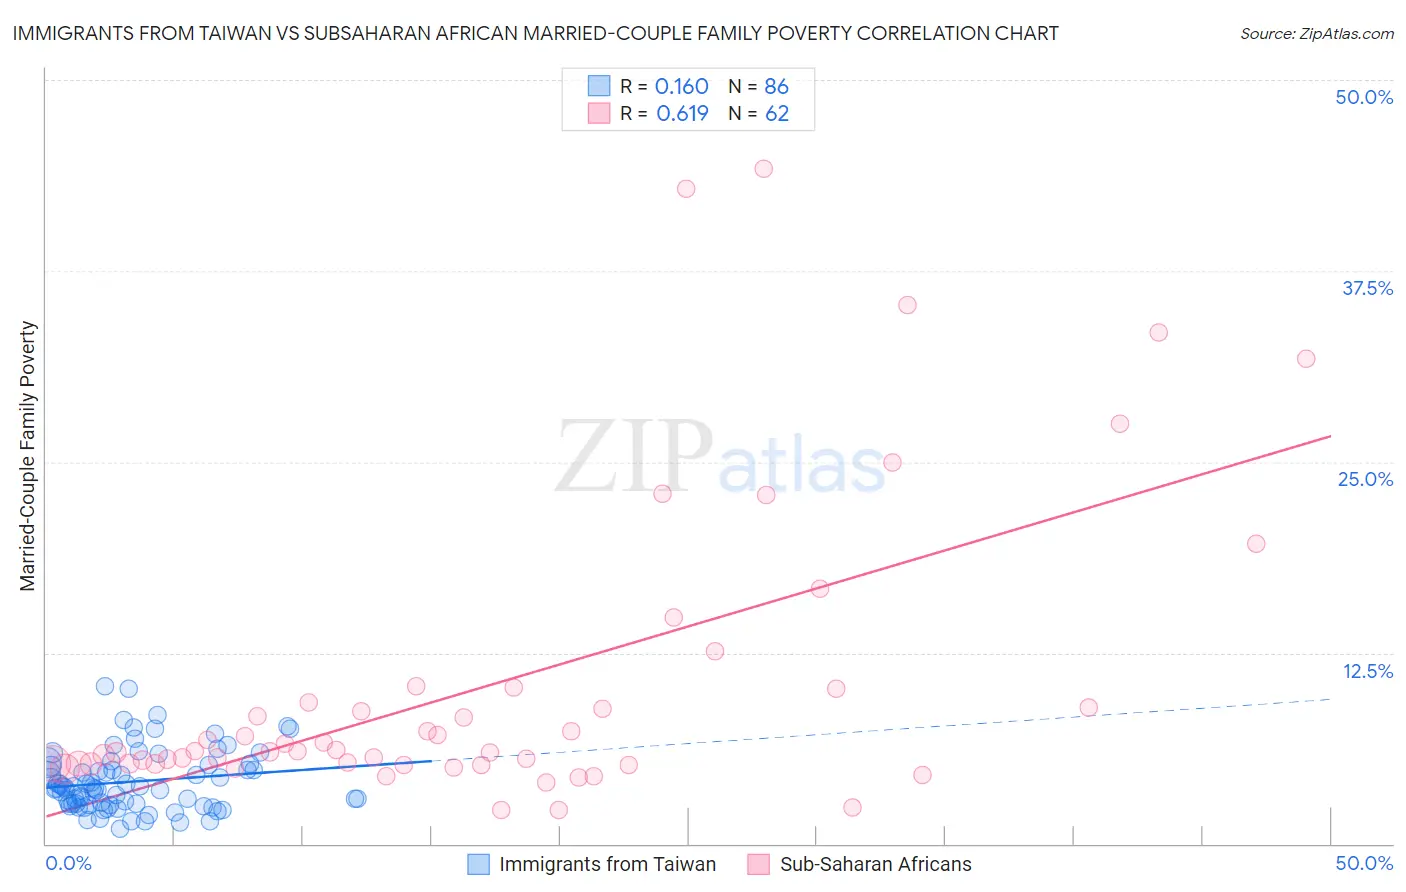 Immigrants from Taiwan vs Subsaharan African Married-Couple Family Poverty